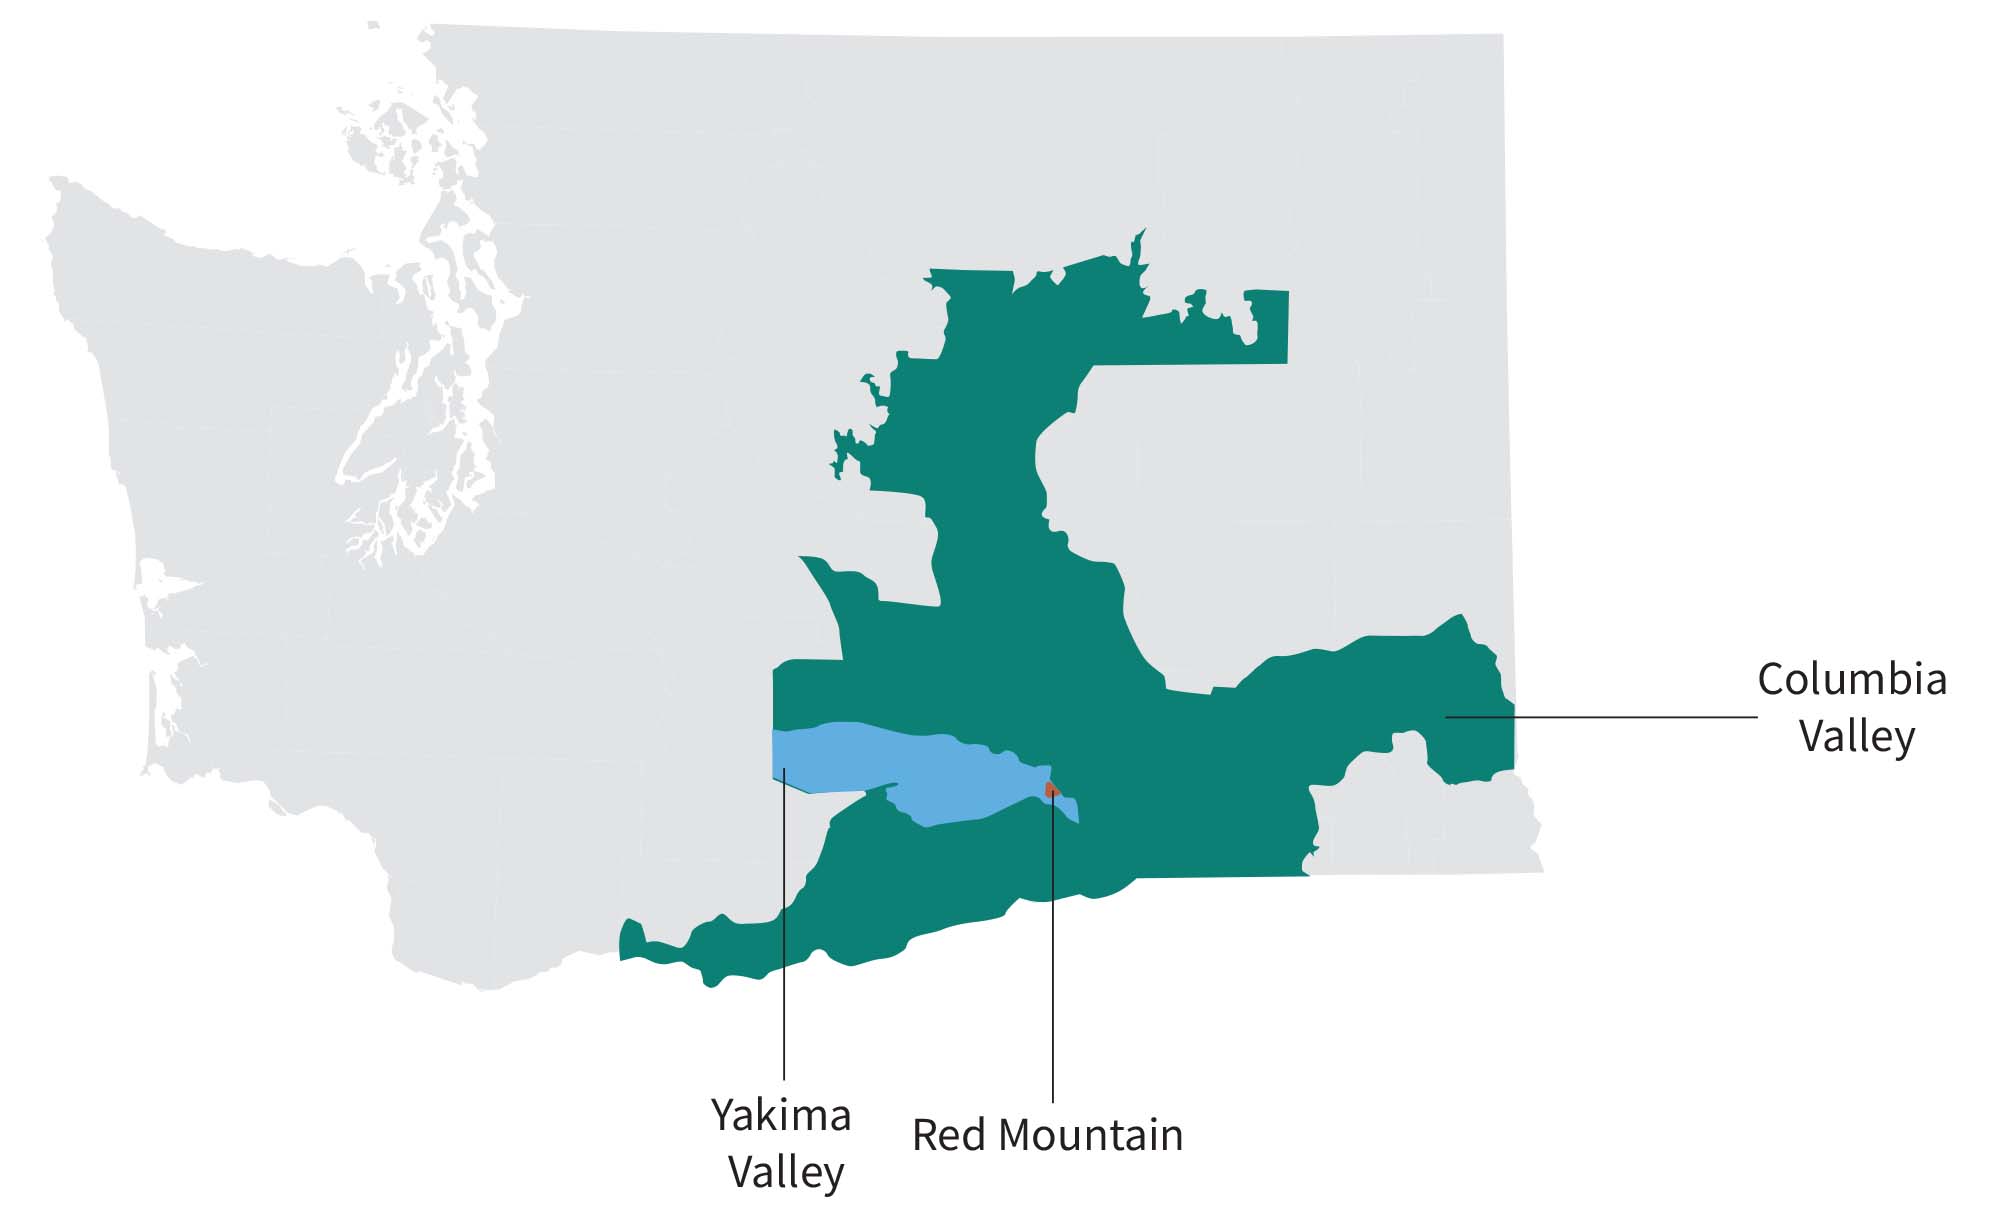 map of chenin blanc winegrowing regions in Washington state: Yakima Valley, Red Mountain, Columbia Valley